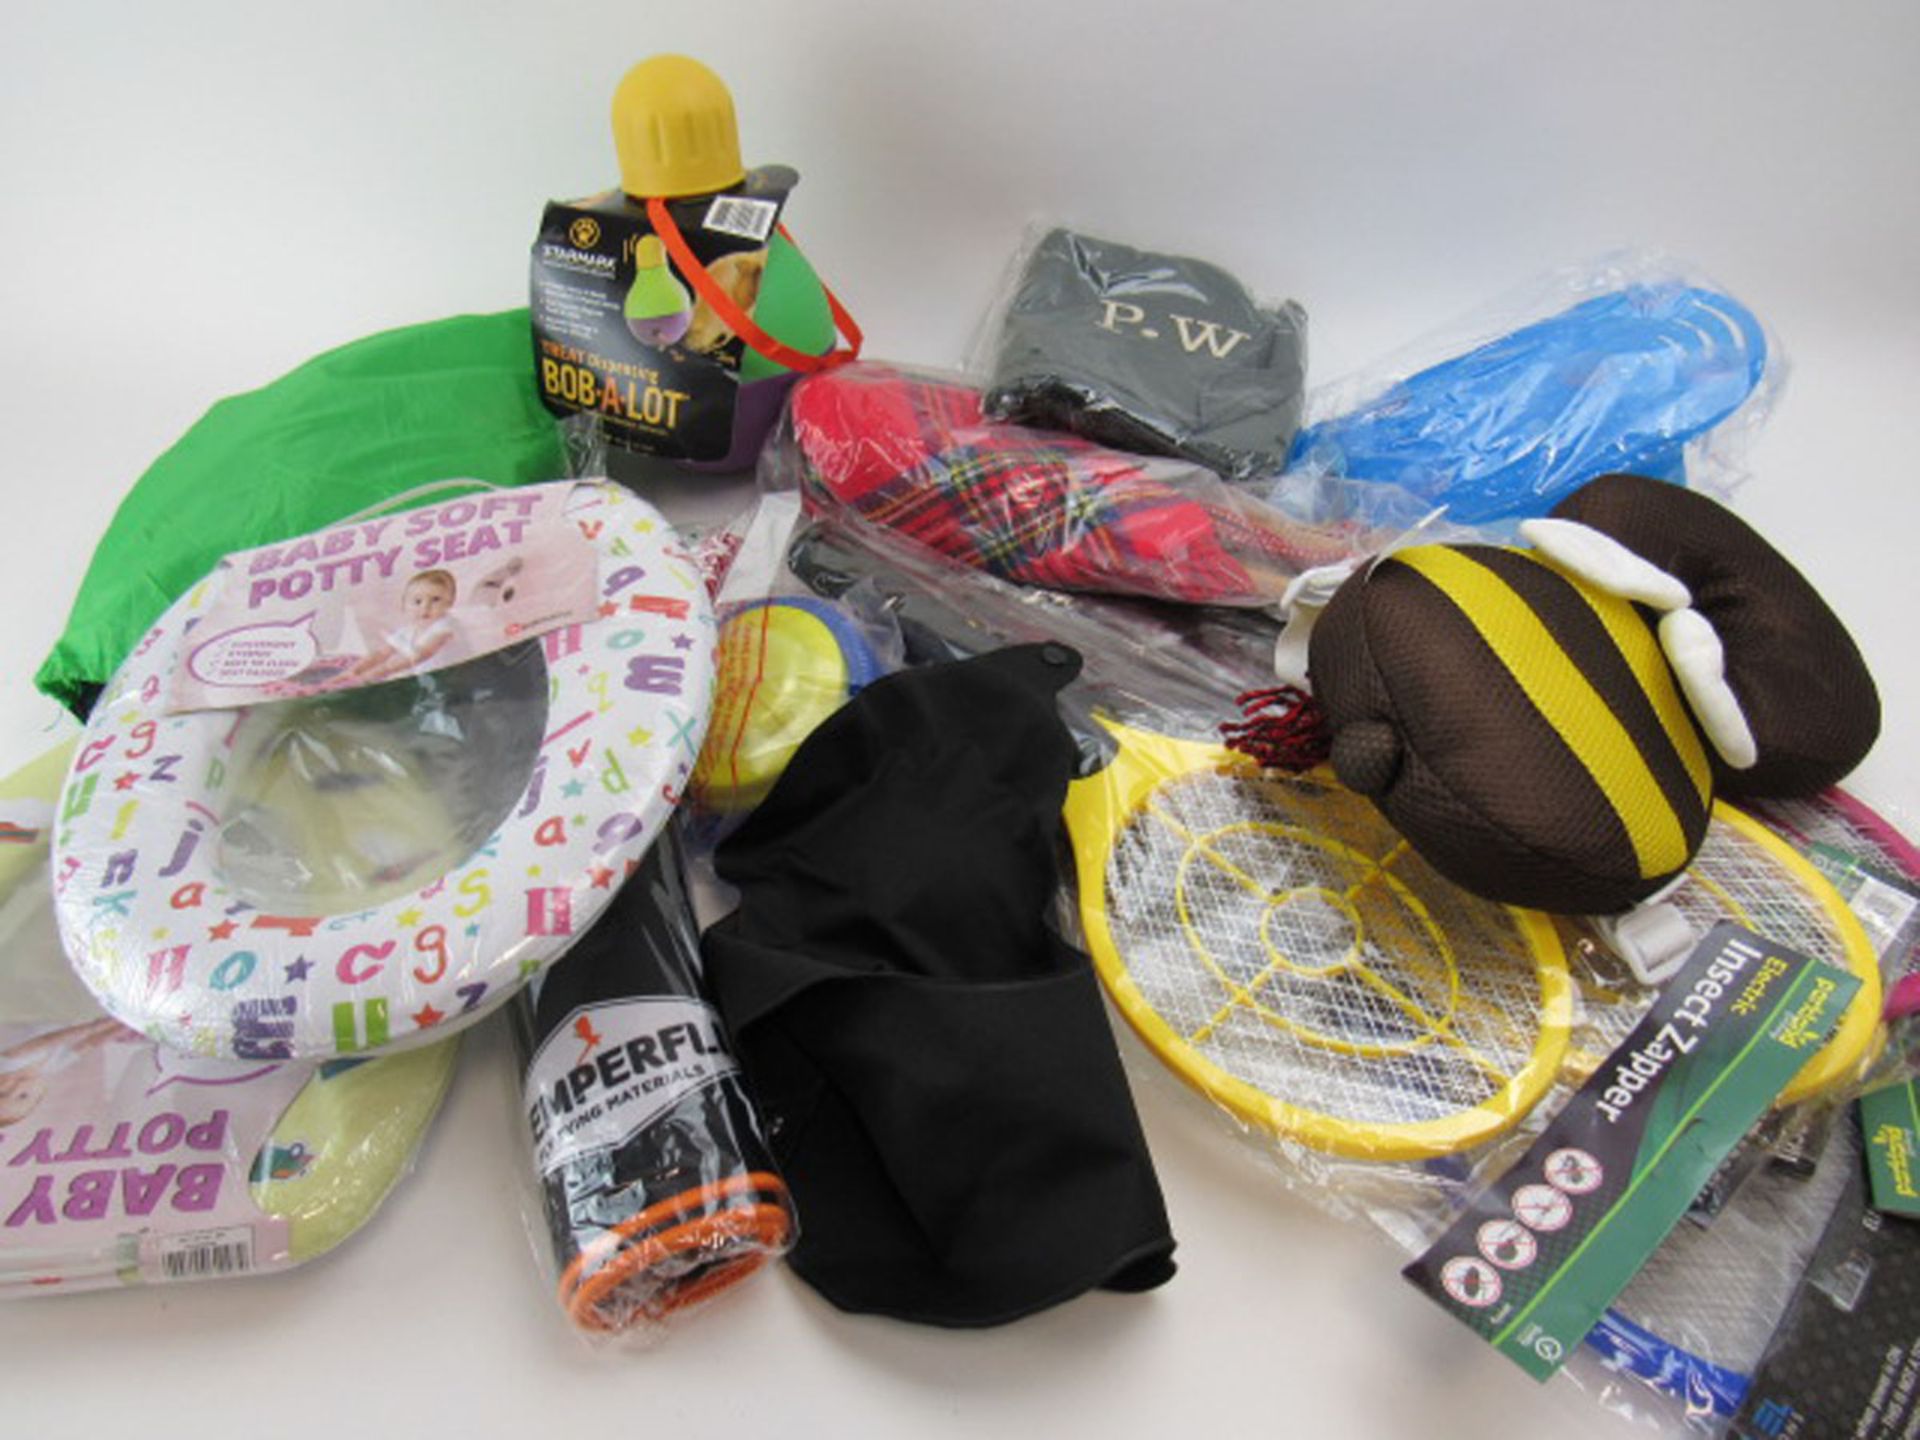 Bag containing insect zappers, Semperfli fly tying kit, Baby's Soft potty seats, dog treat toy, etc.